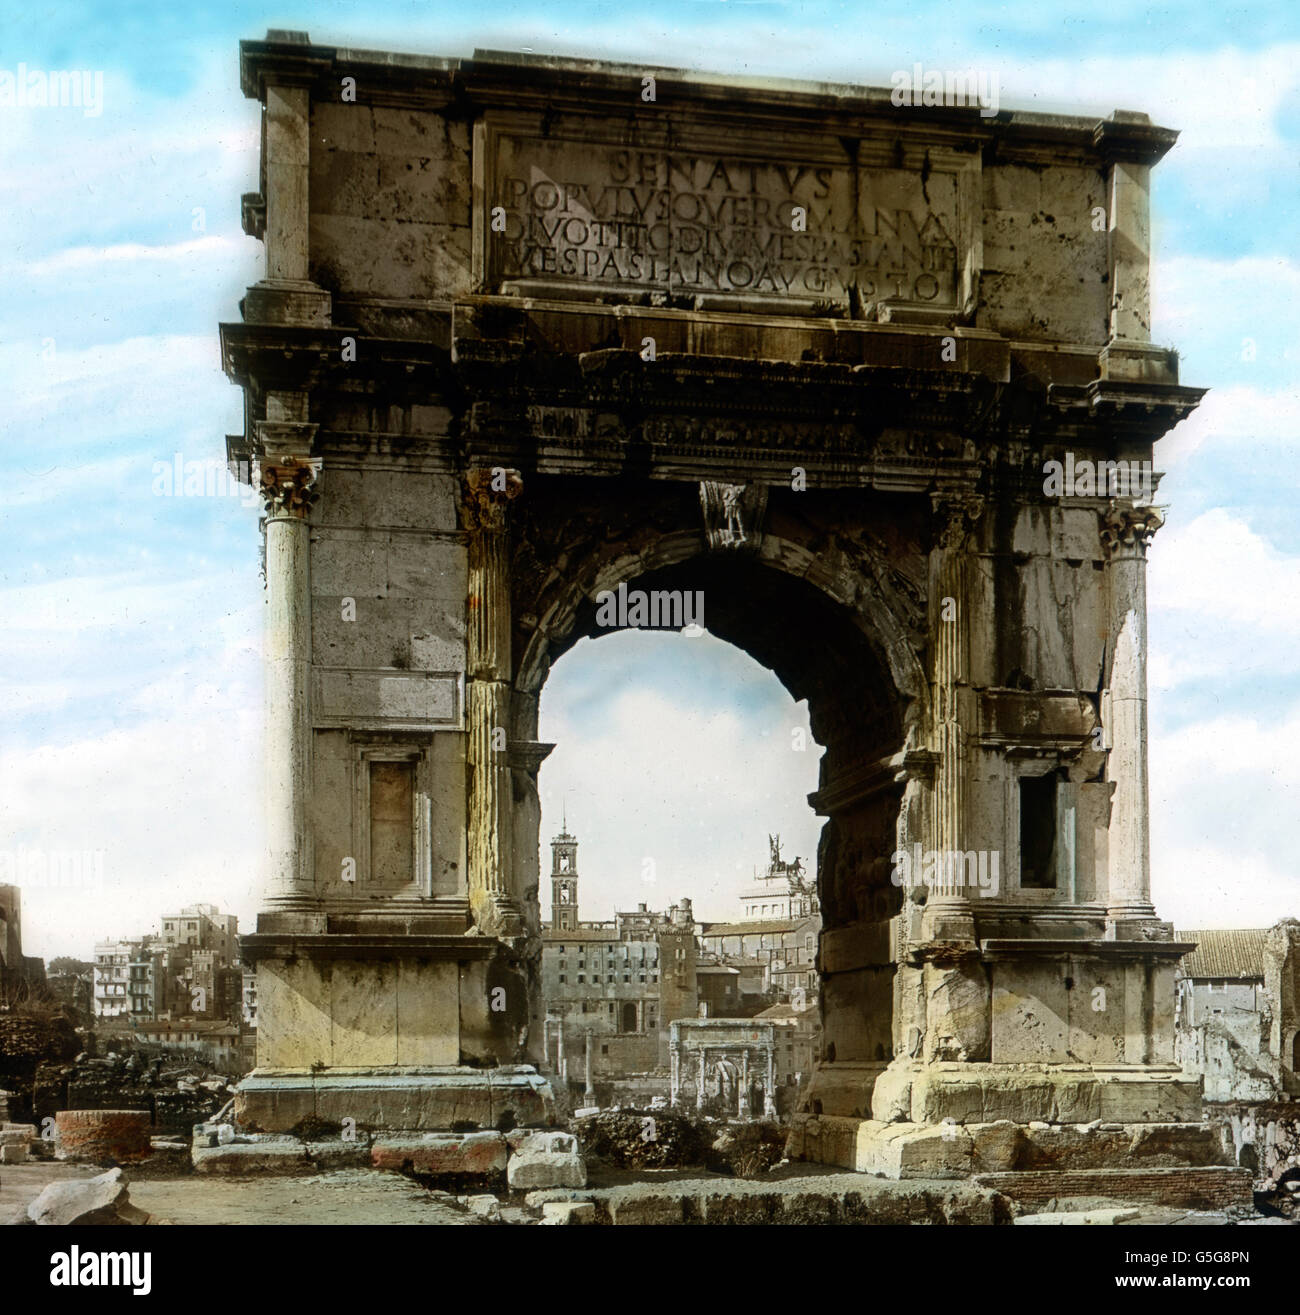 Triumphbogen des Titus. Triumphal arch of Titus in the city of Rome. ancient, architecture, Roman, stone, gate, arch, Europe, Italy, Rome, history, historical, 1910s, 1920s, 20th century, archive, Carl Simon, hand-coloured glass slide Stock Photo